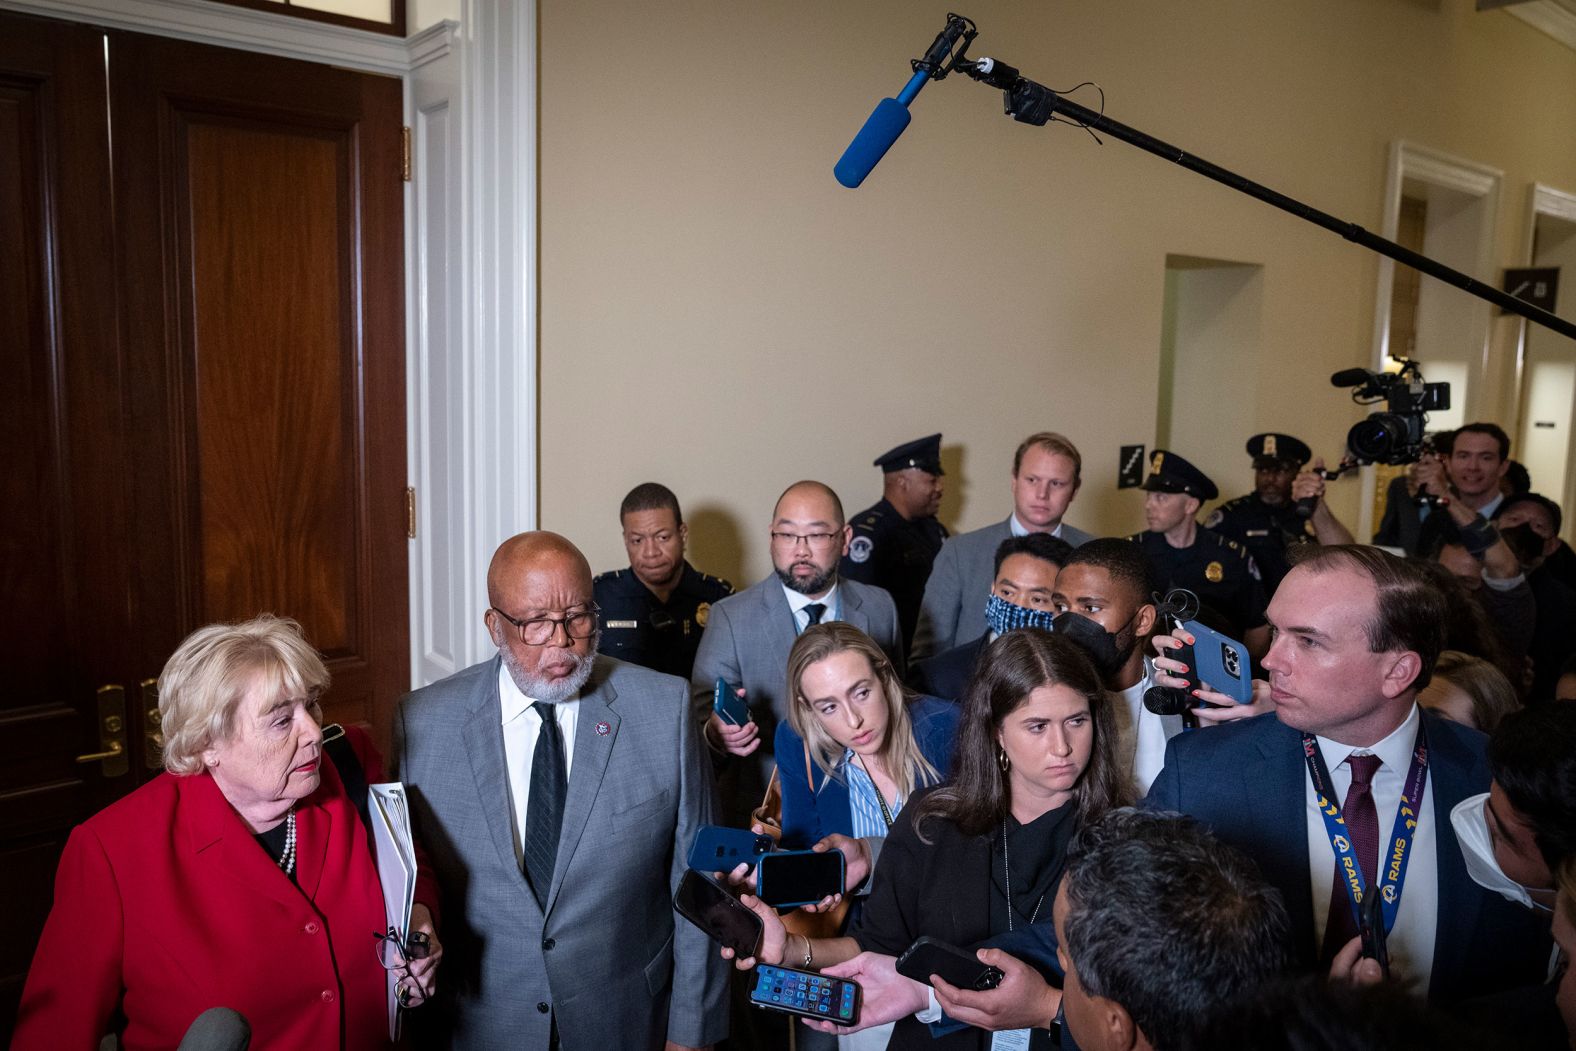 Thompson and Lofgren speak to reporters after the committee's hearing on June 13. They stopped short of saying former President Trump committed crimes, <a href="index.php?page=&url=https%3A%2F%2Fwww.cnn.com%2Fpolitics%2Flive-news%2Fjanuary-6-hearings-june-13%2Fh_2ea46acbfb2c573b4c2fb72236d37f0d" target="_blank">arguing that the Justice Department must make that case.</a>